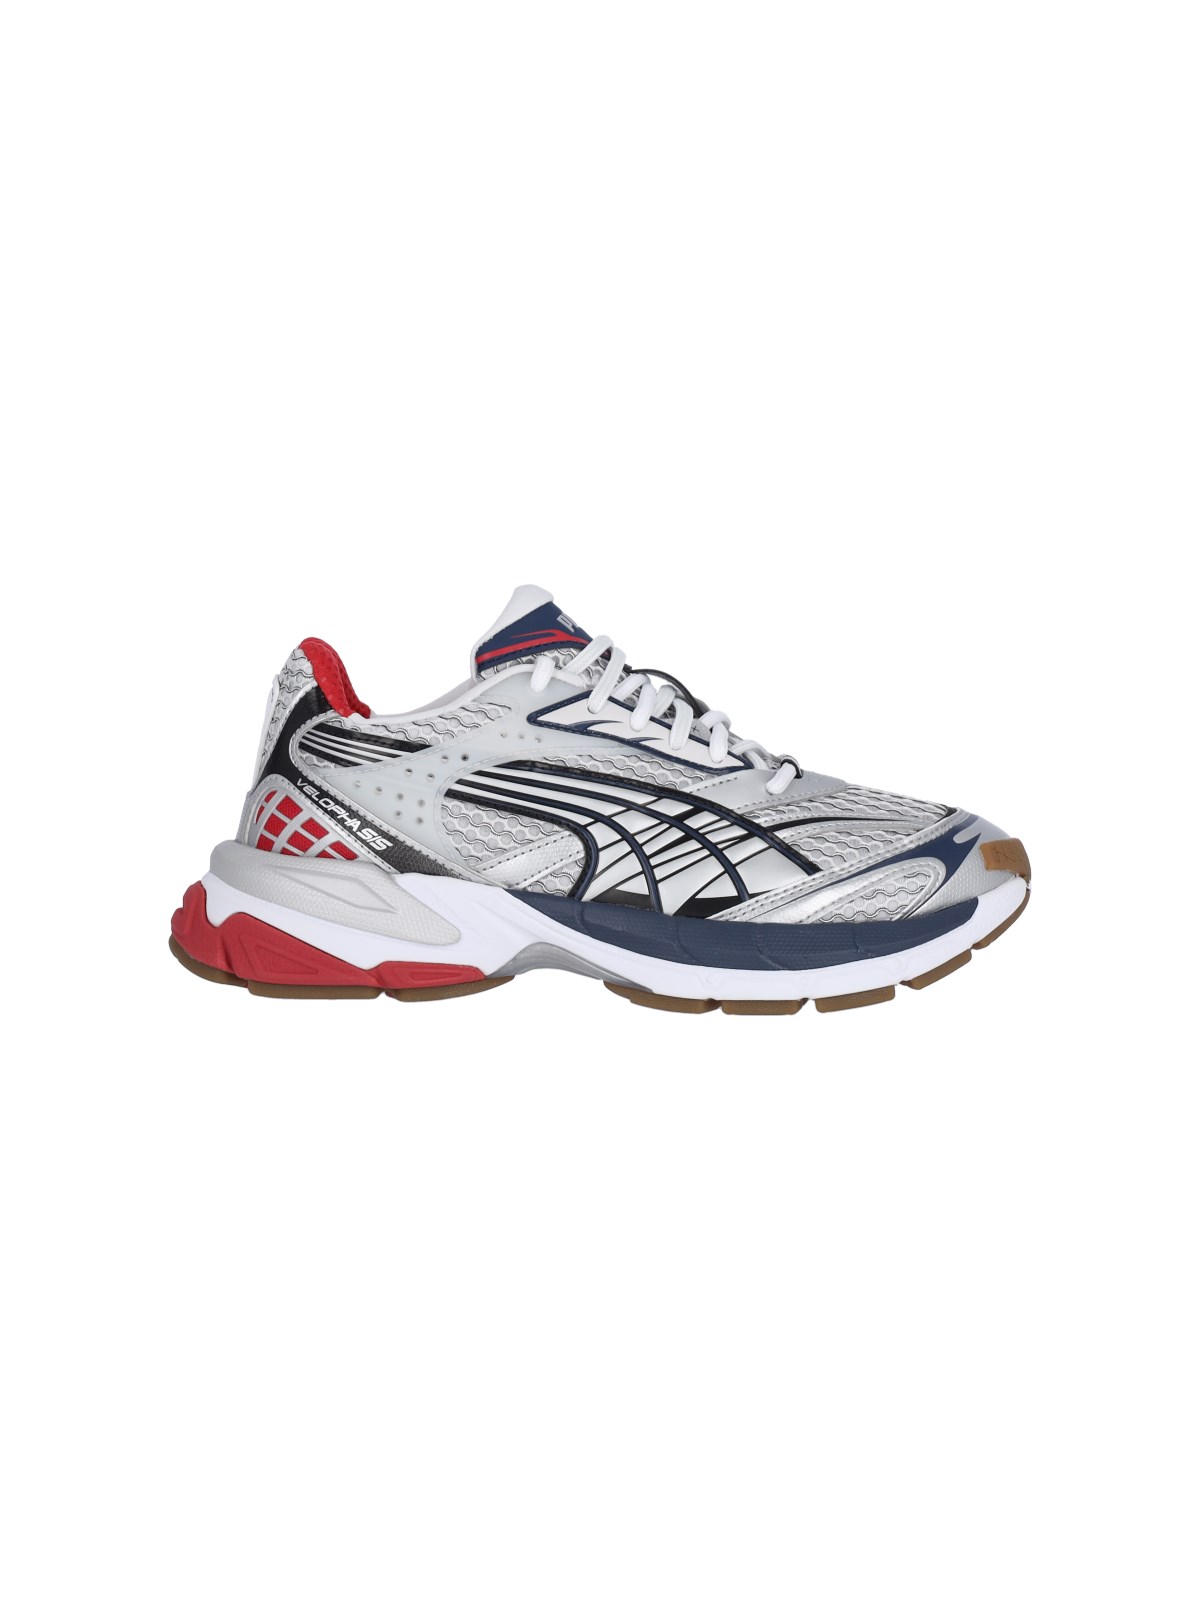 PUMA "VELOPHASIS PHASED" trainers